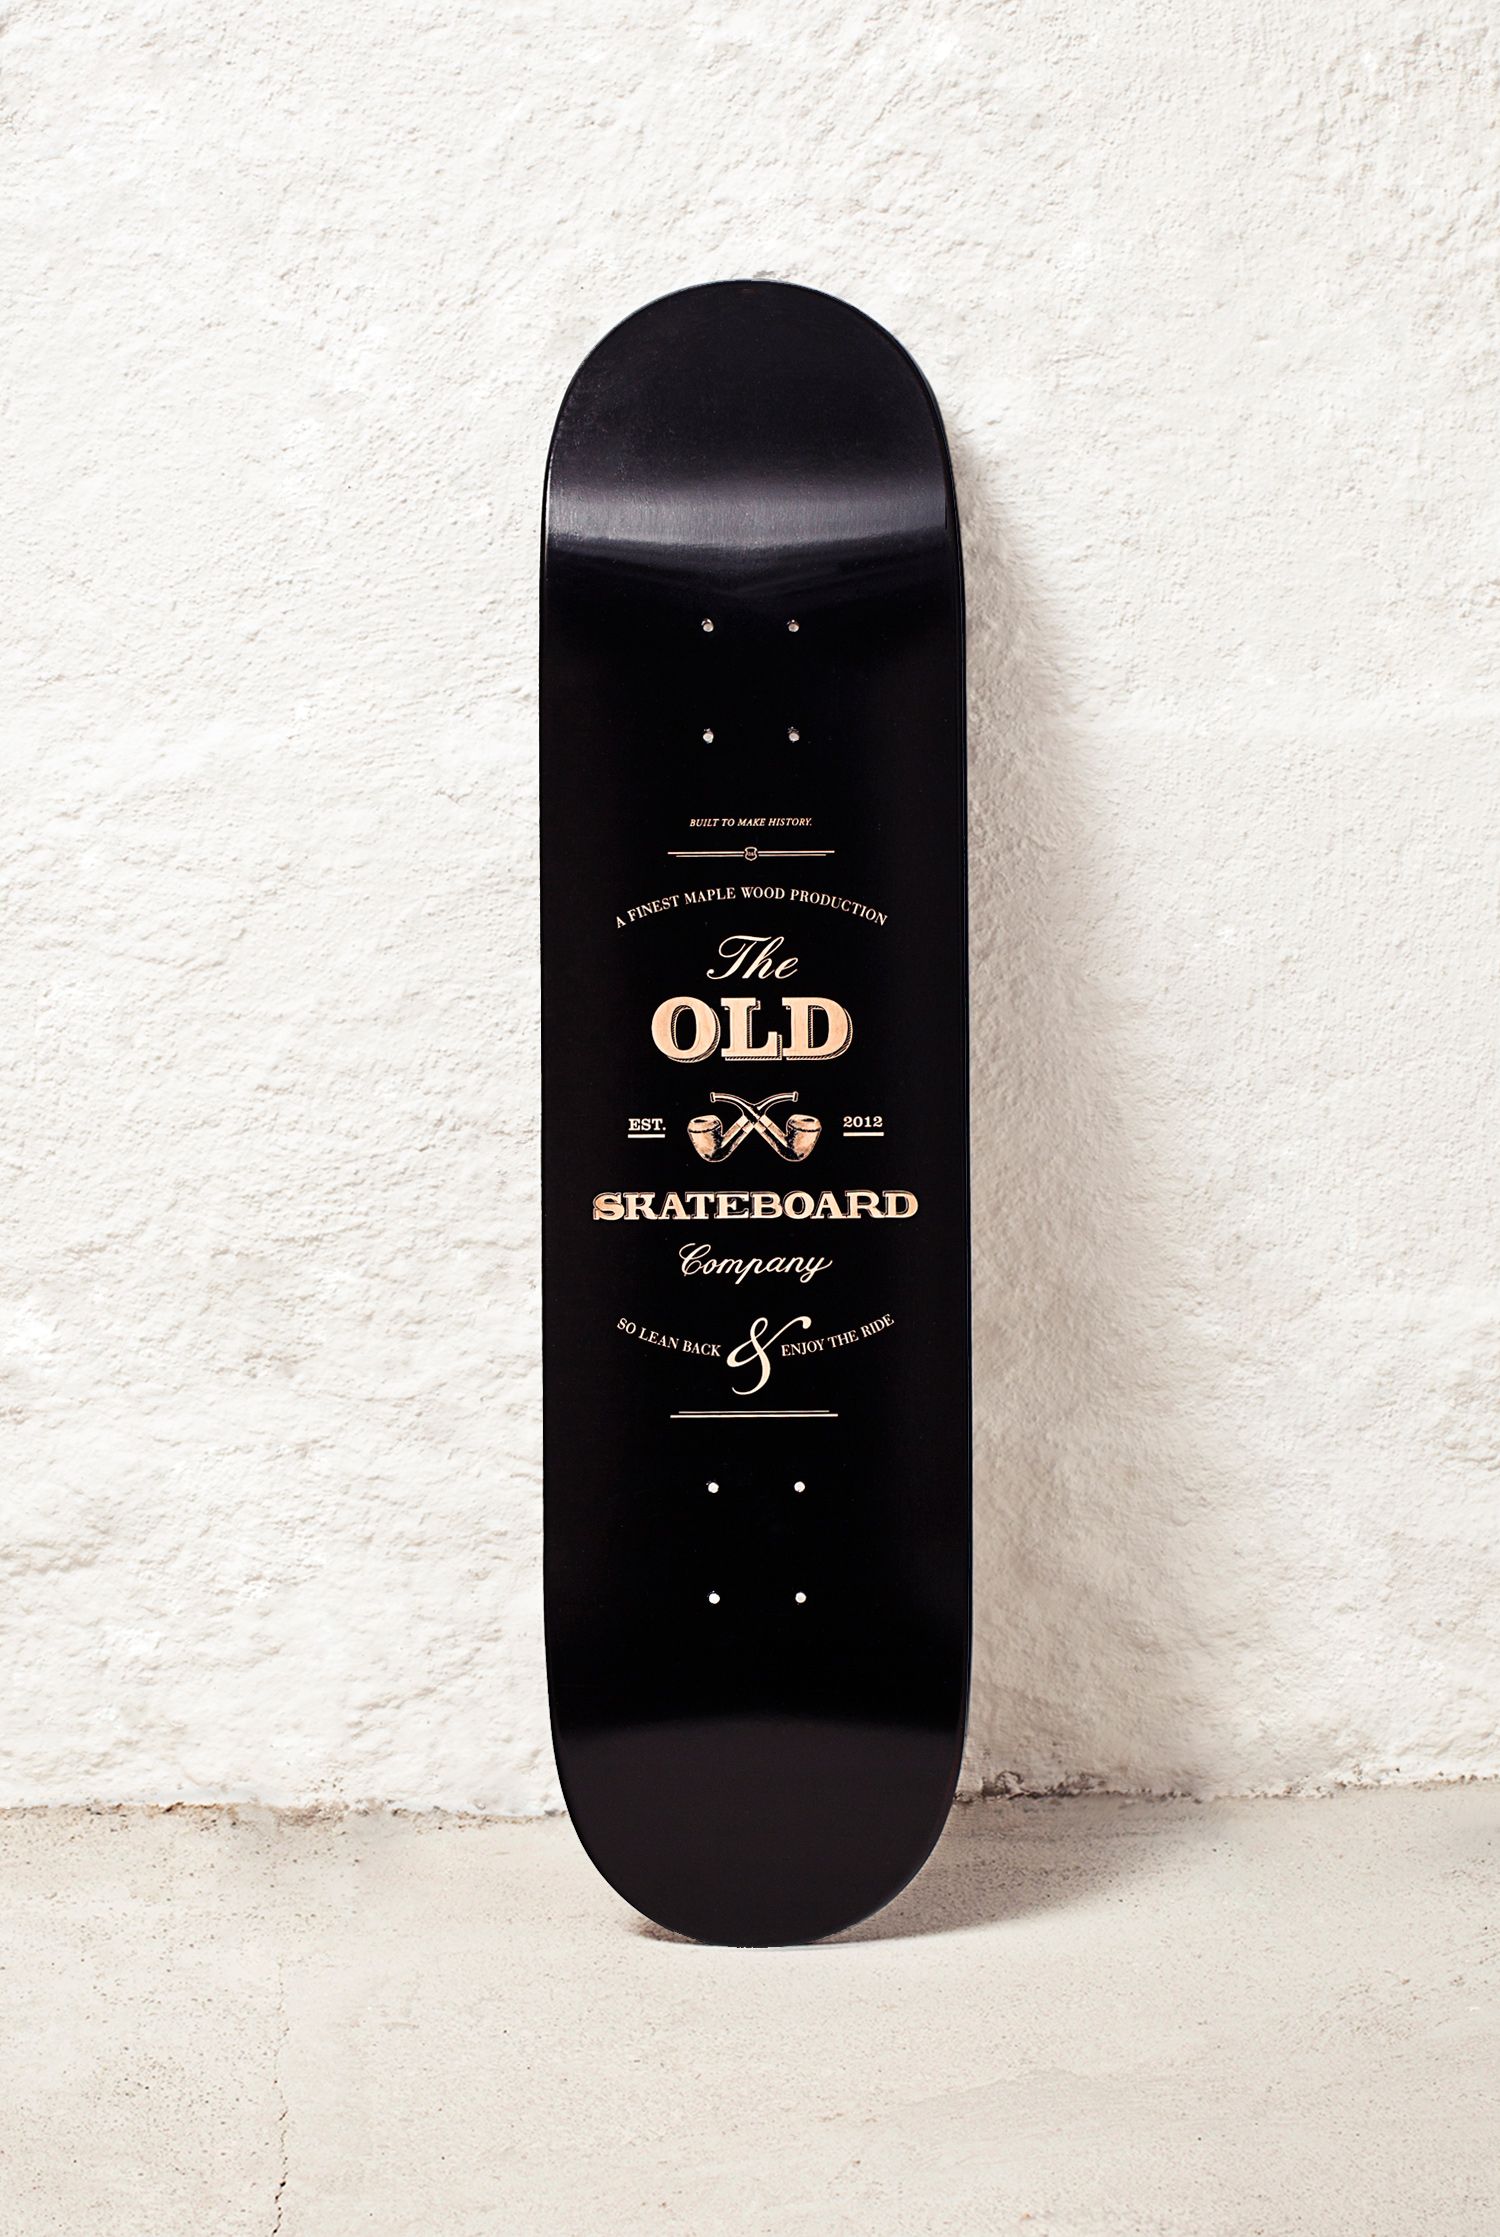 Black series by Old Skateboards